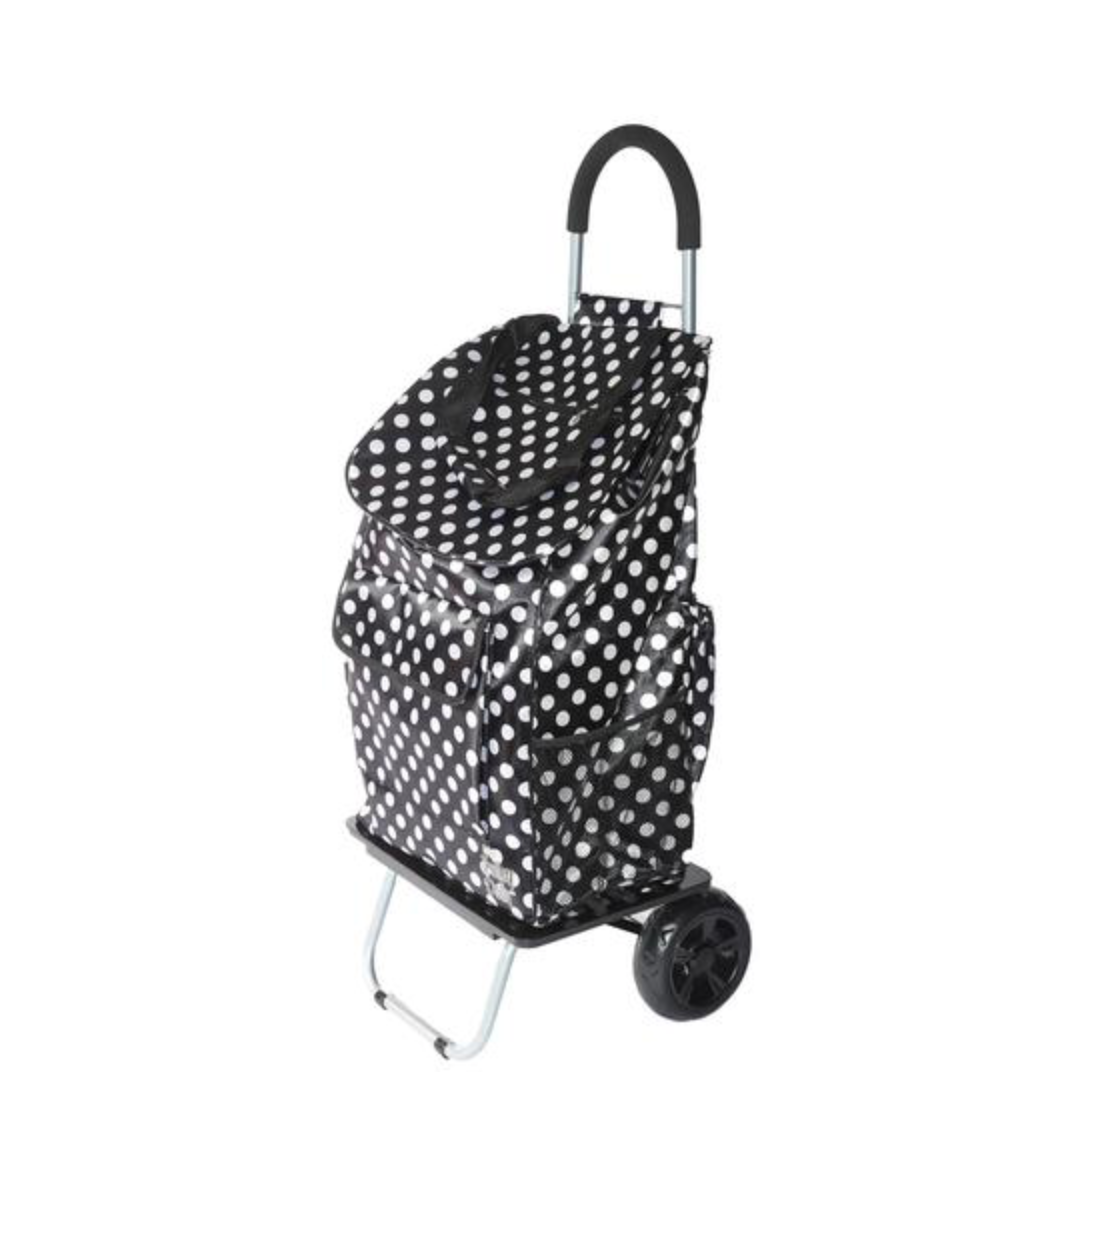 dbest-products-Bigger-Trolley-Dolly-Black-Polka-Dot